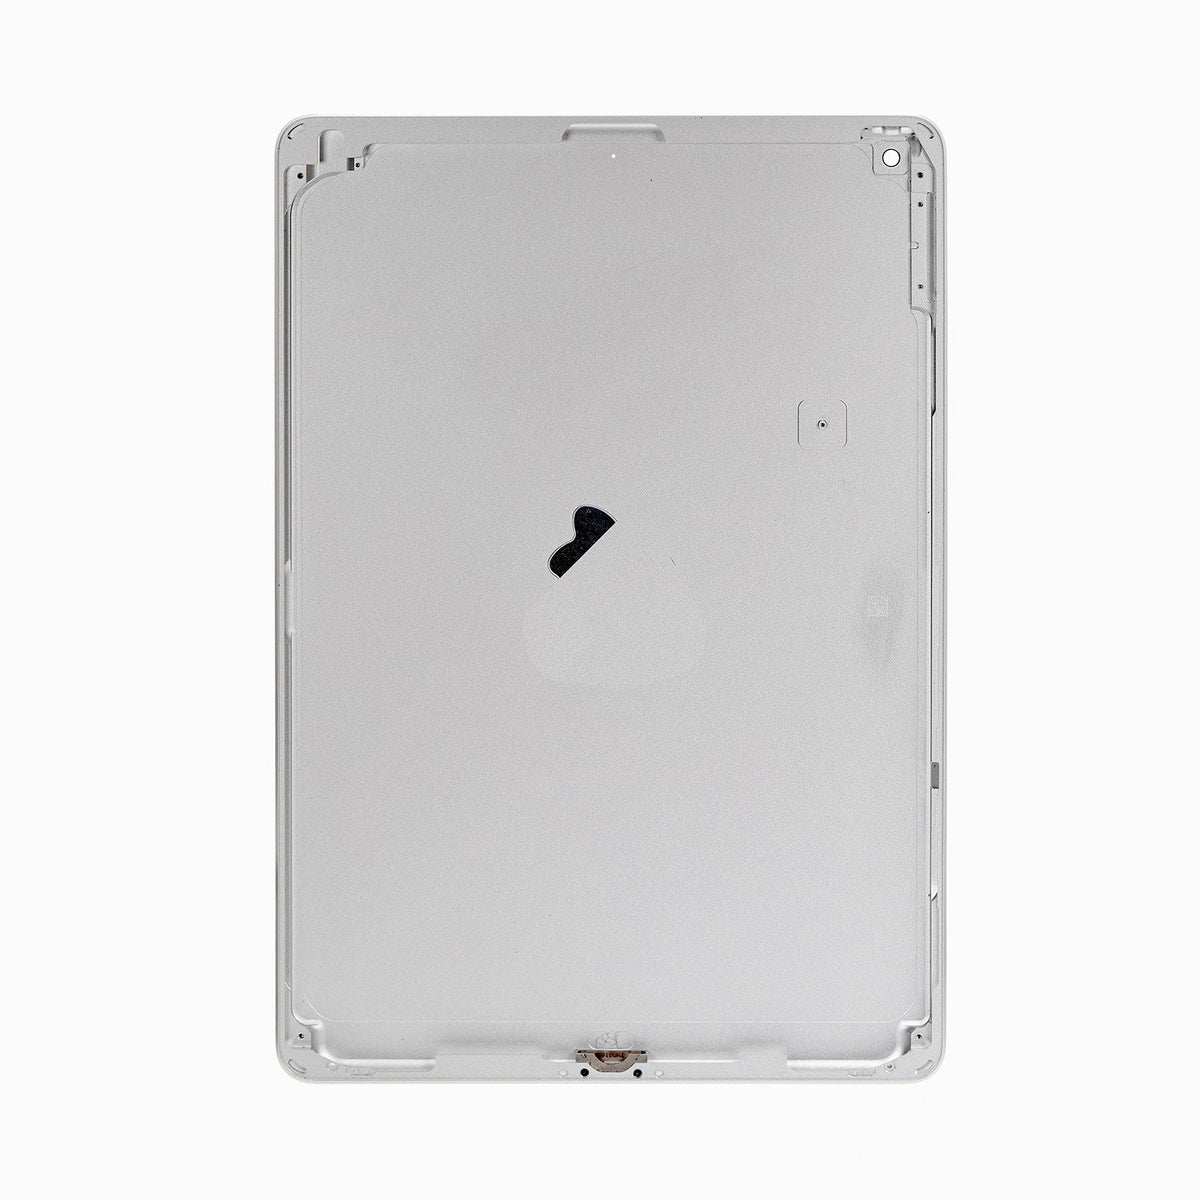 SILVER  BACK COVER (WIFI VERSION) FOR IPAD 7TH/8TH